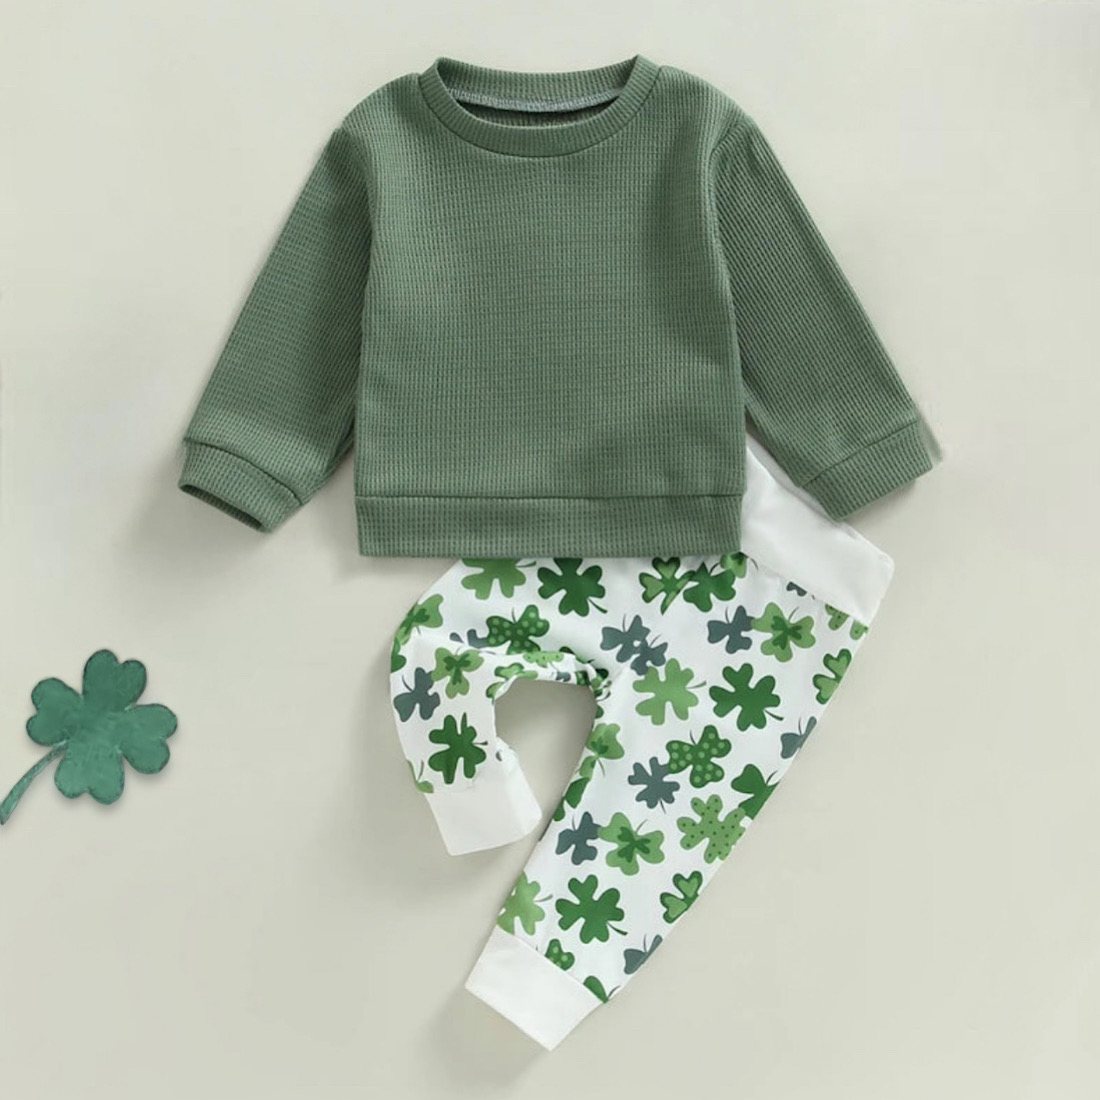 Baby And Toddler Boys St. Patricks Day Clothing Set Green Long Sleeve Sweatshirt And Clover Jogger Pants Outfit